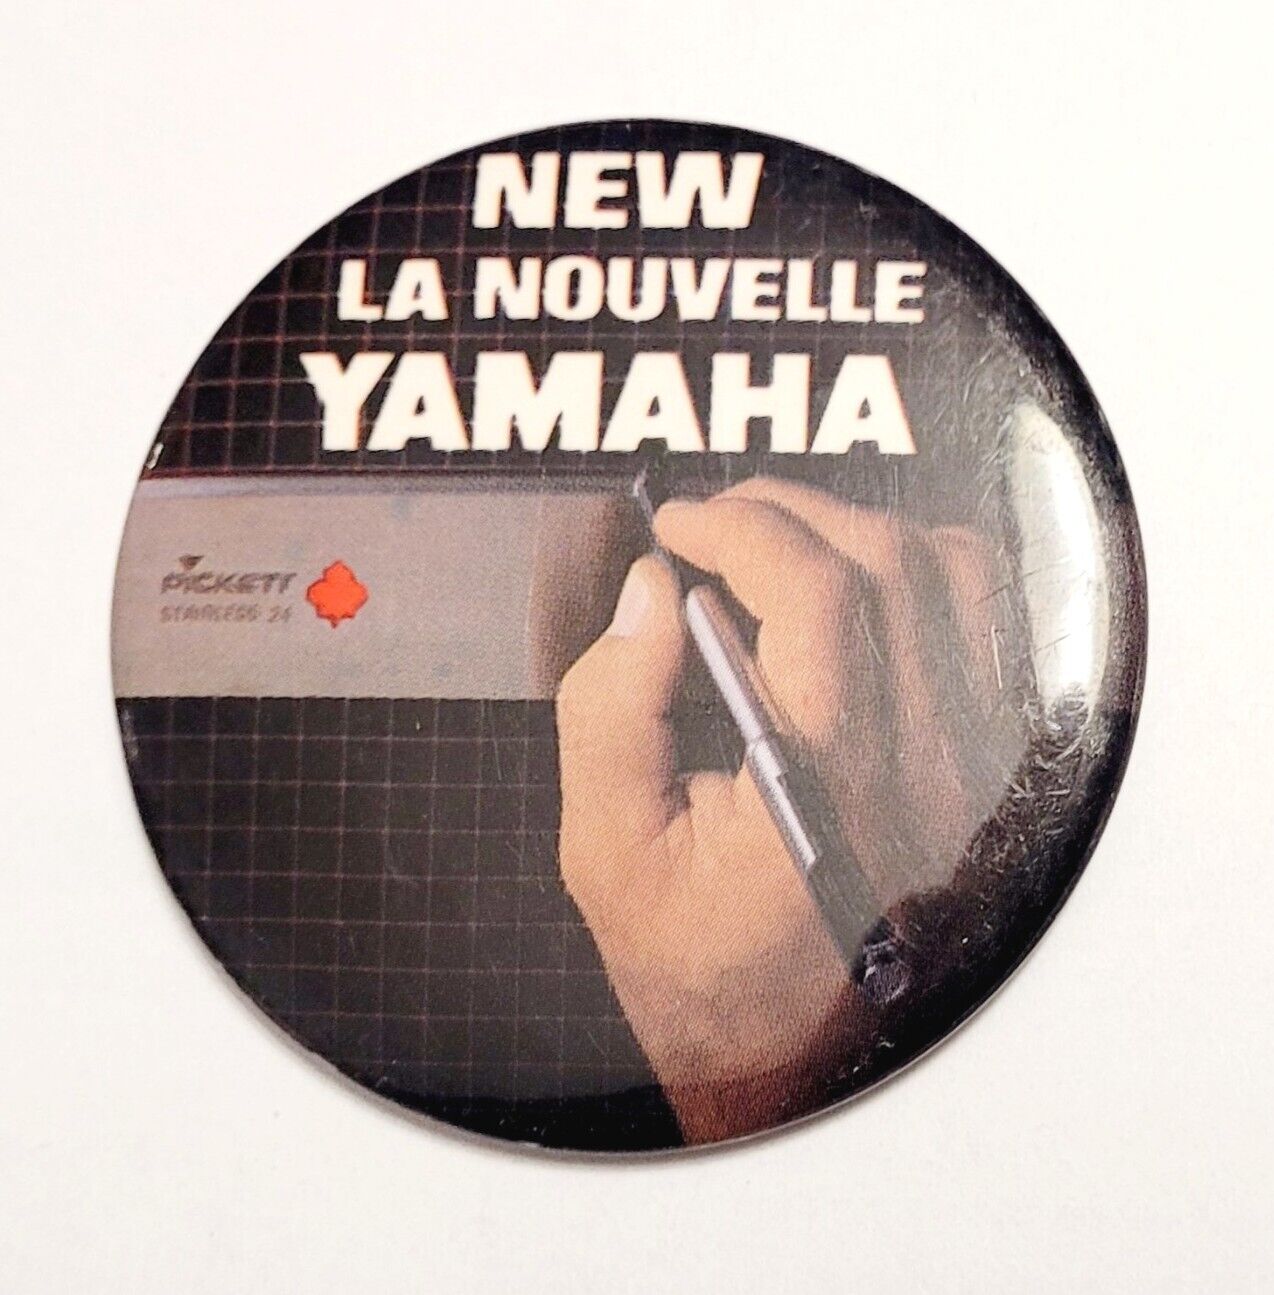 Vintage YAMAHA Pickett Adertising Pinback Button 1980s - French Canada Music